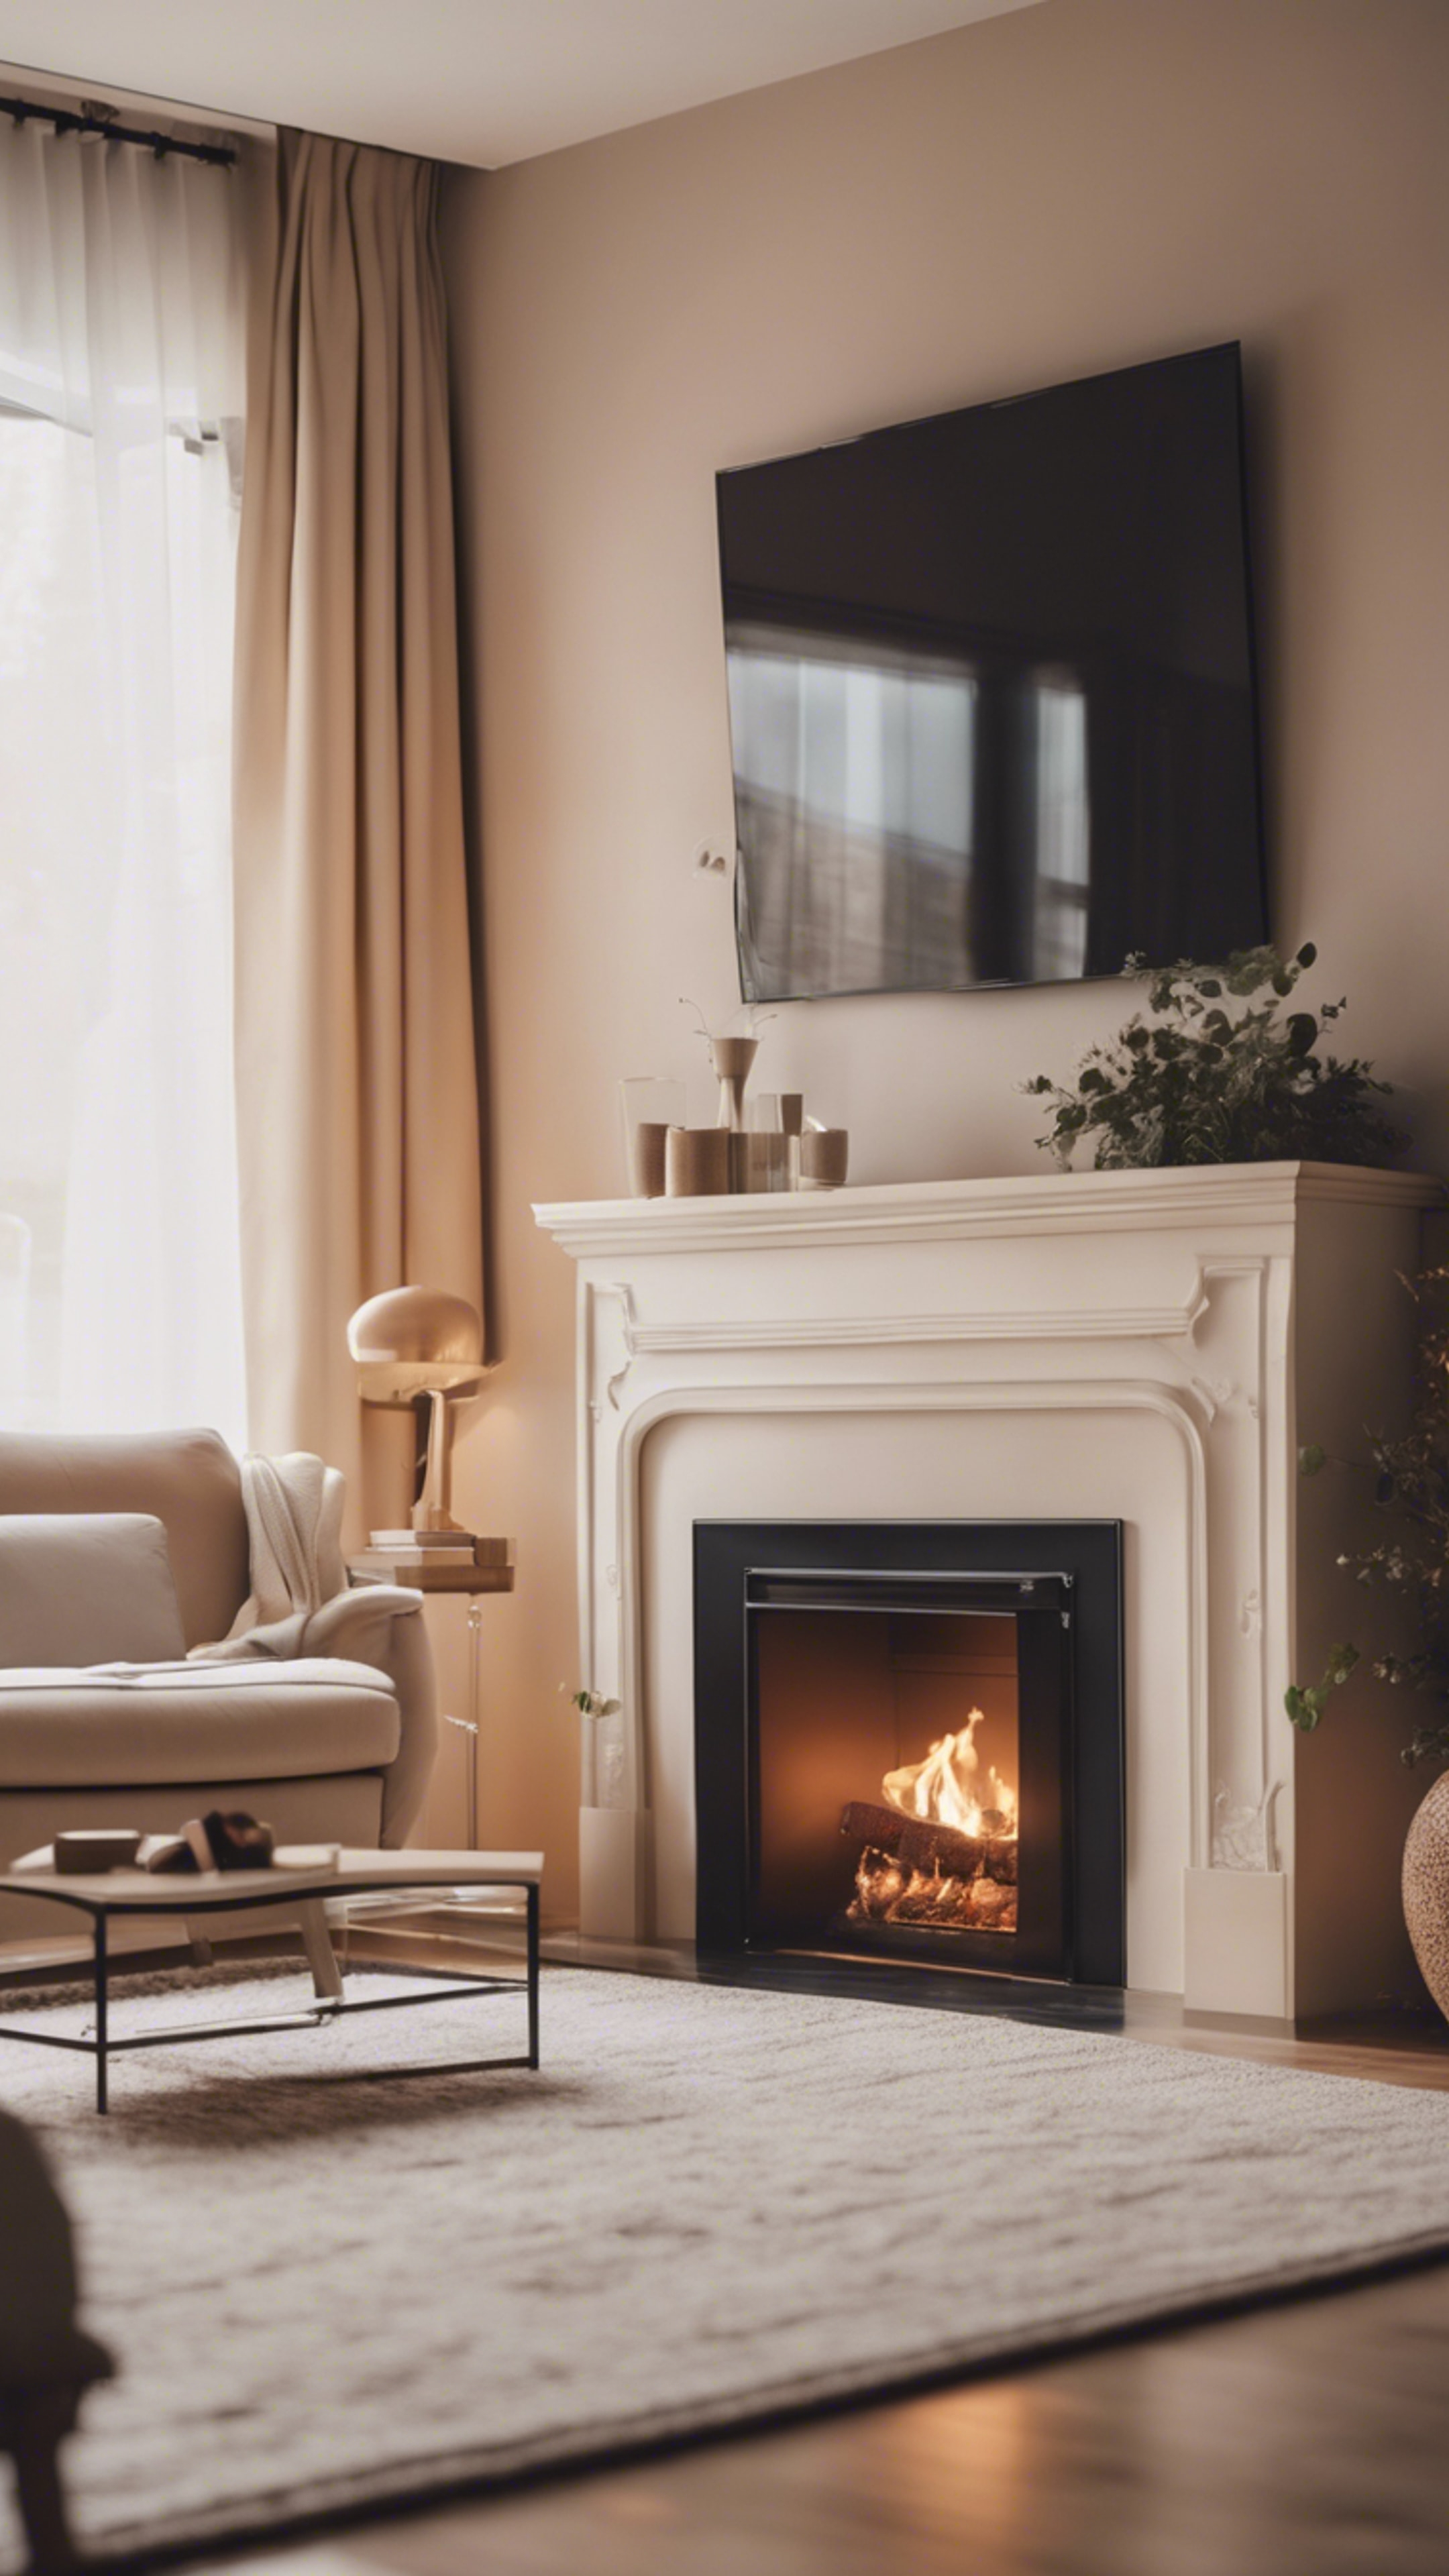 A cozy and tranquil cool beige living room with a fireplace alive with dancing flames. Behang[fdd7e3460c134e479b57]